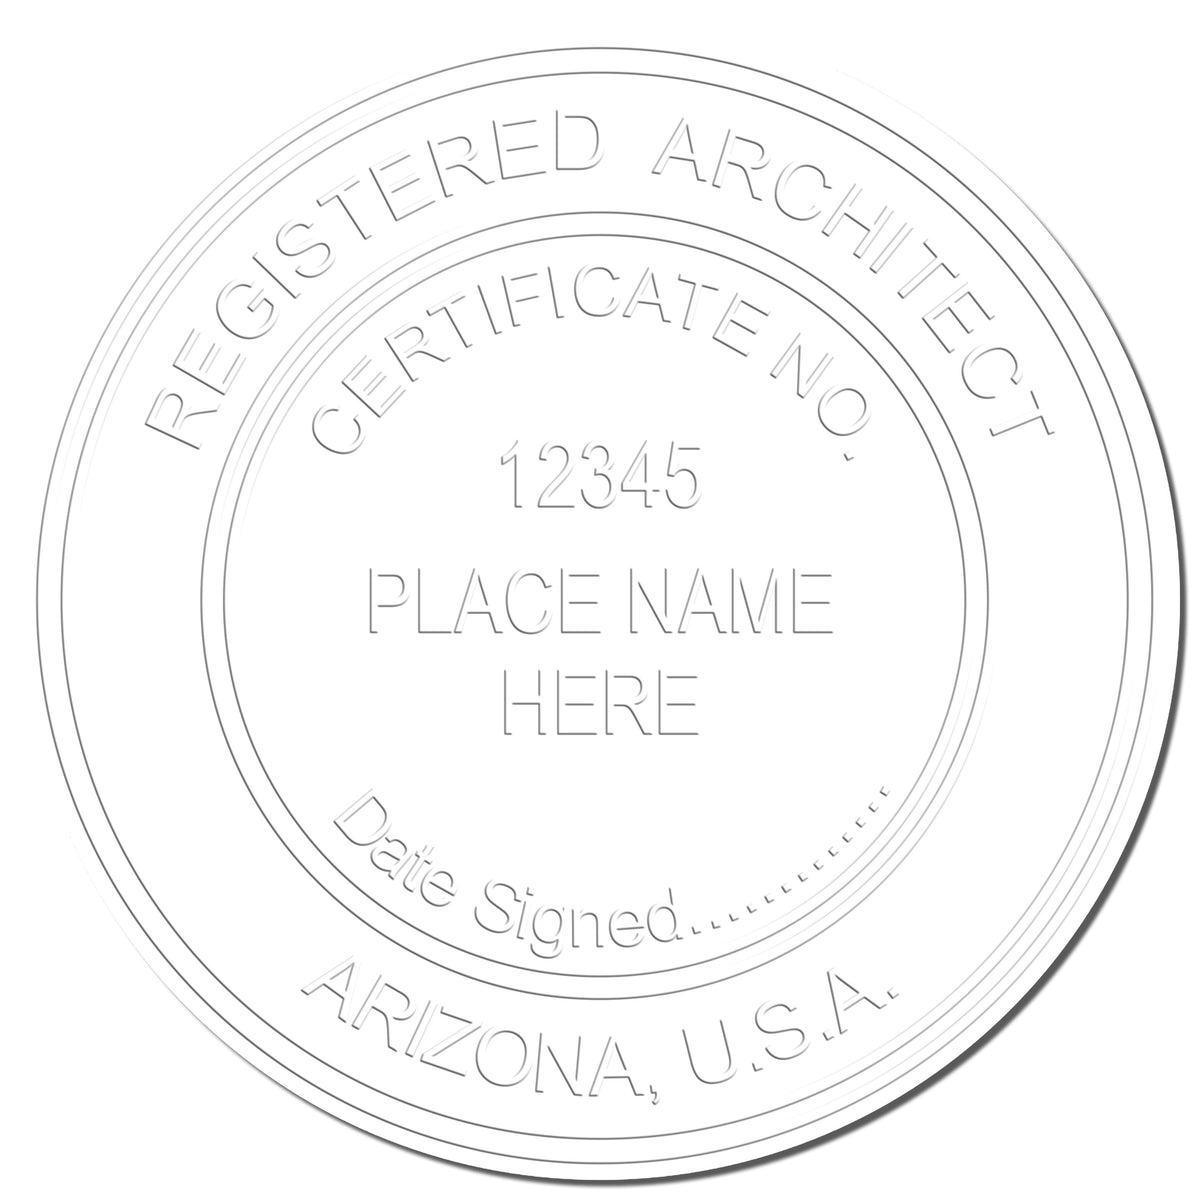 This paper is stamped with a sample imprint of the State of Arizona Architectural Seal Embosser, signifying its quality and reliability.